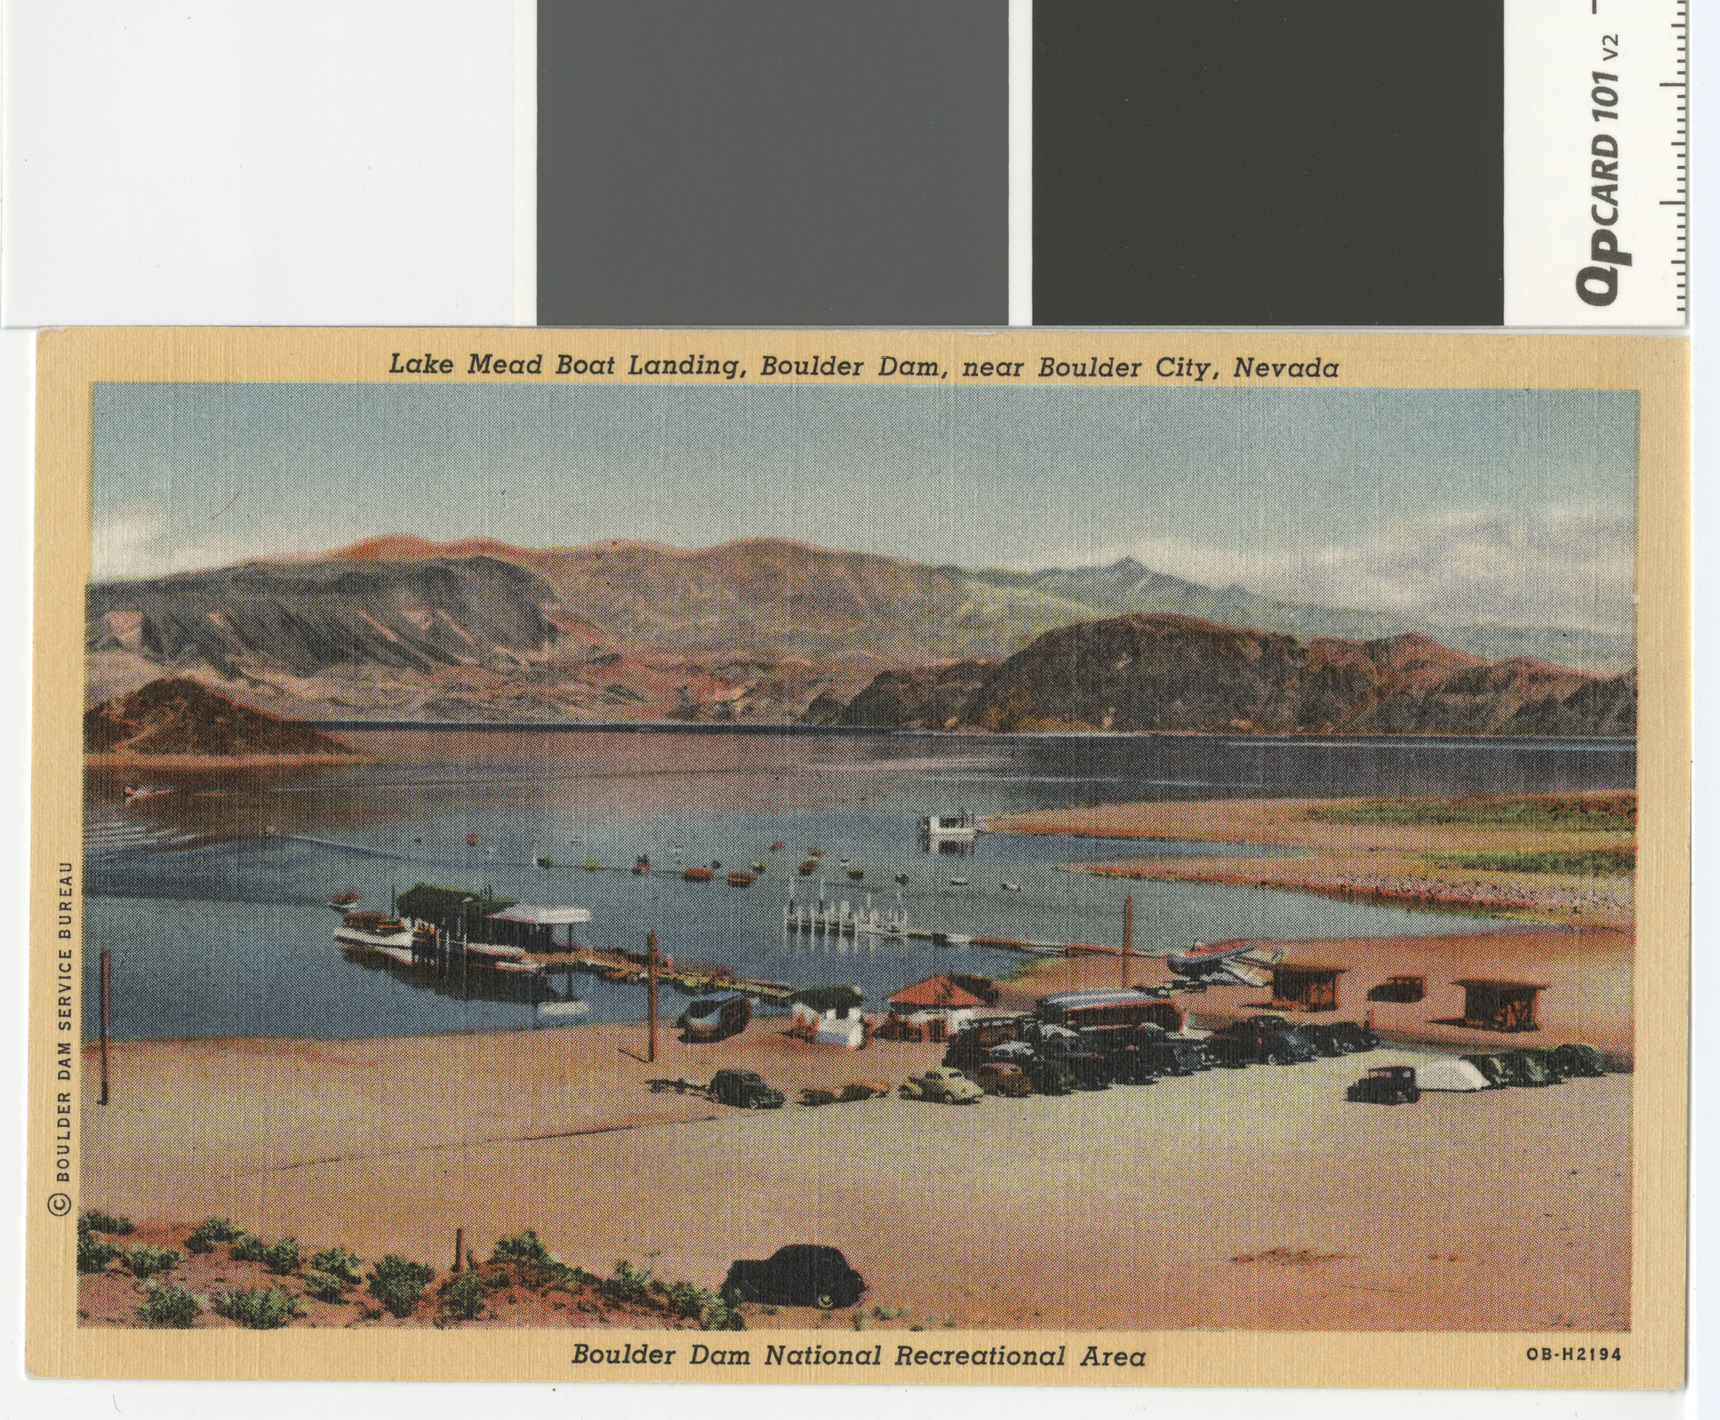 Postcard showing the Lake Mead boat landing at the Boulder Dam National Recreation Area, circa 1940